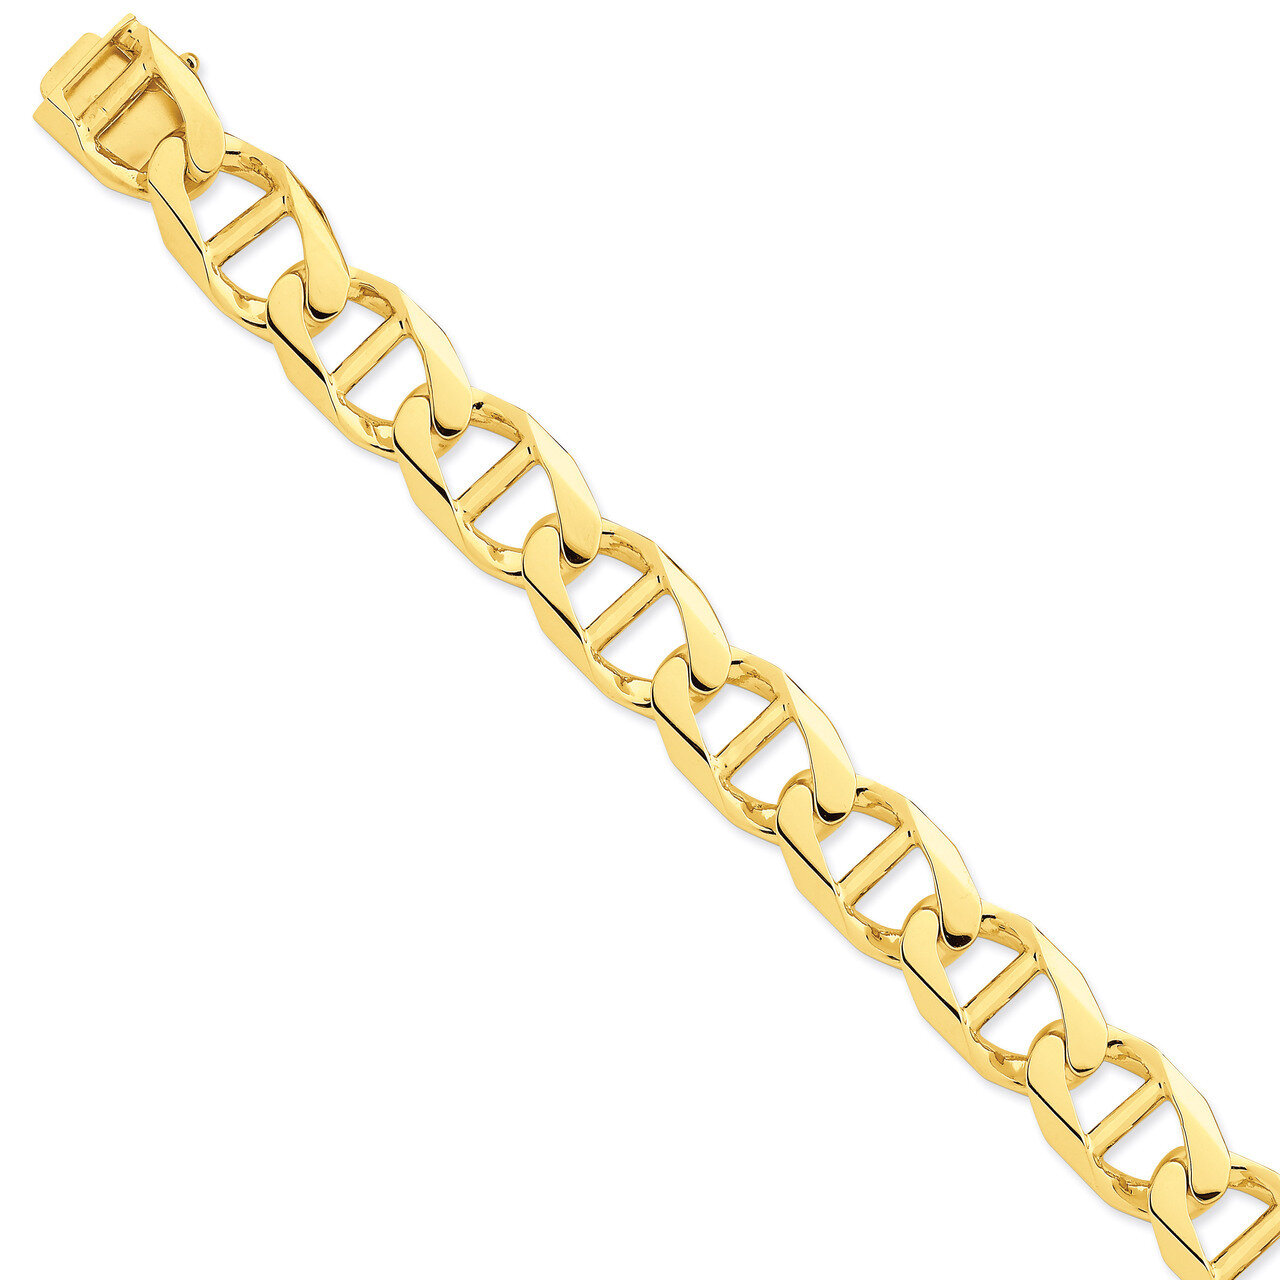 15mm Hand-polished Anchor Link Chain 8 Inch 14k Gold LK104-8